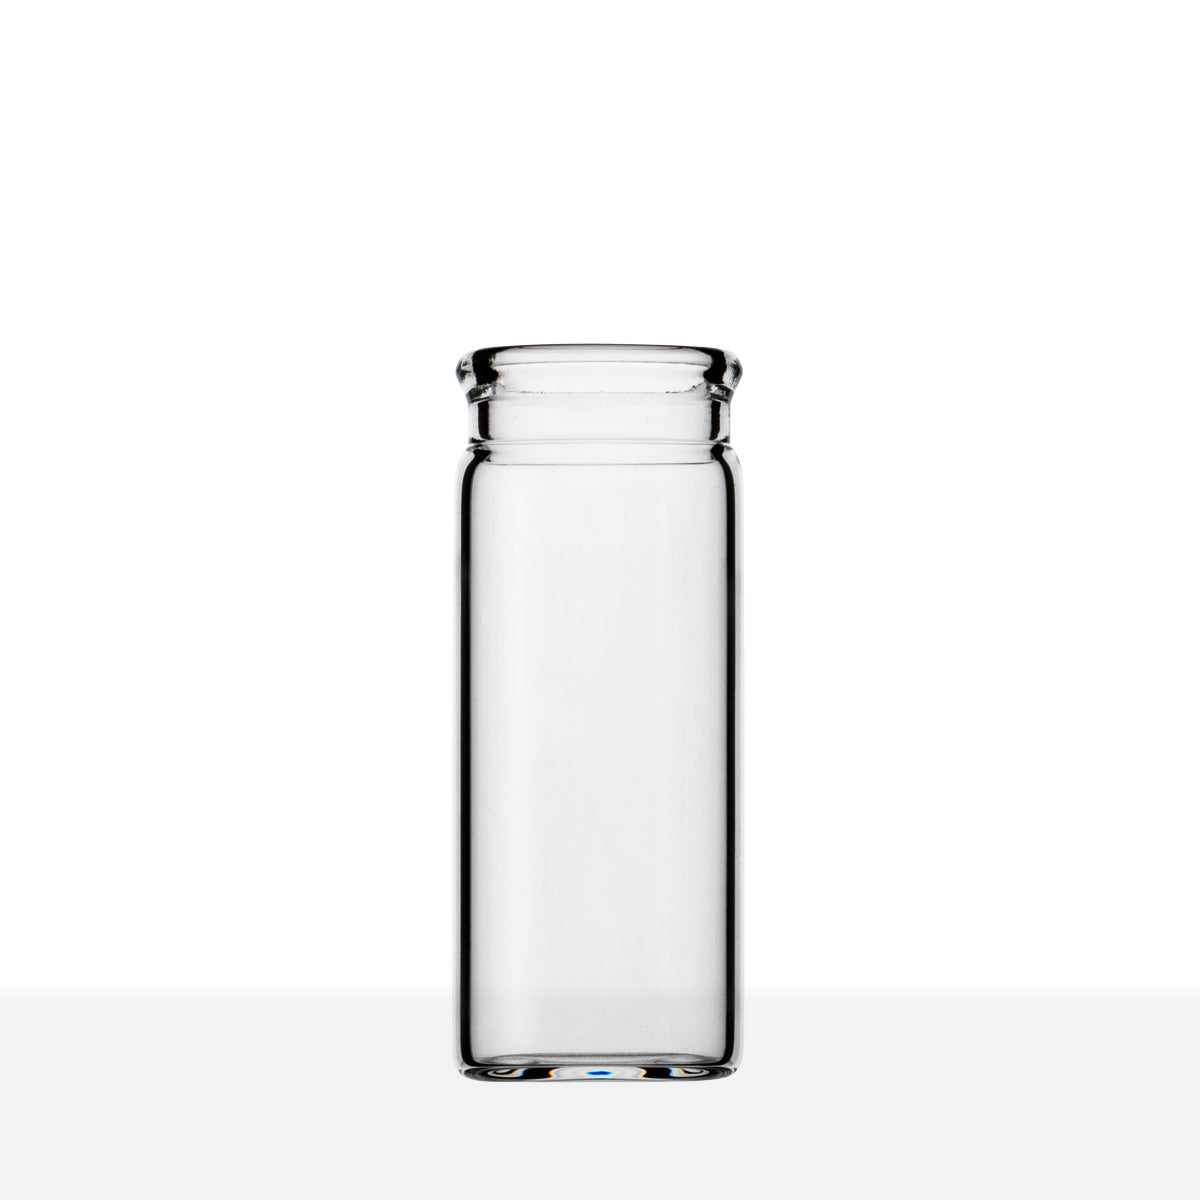 DISPLAY GLASS VIALS - CLEAR Item #:VCPS2151